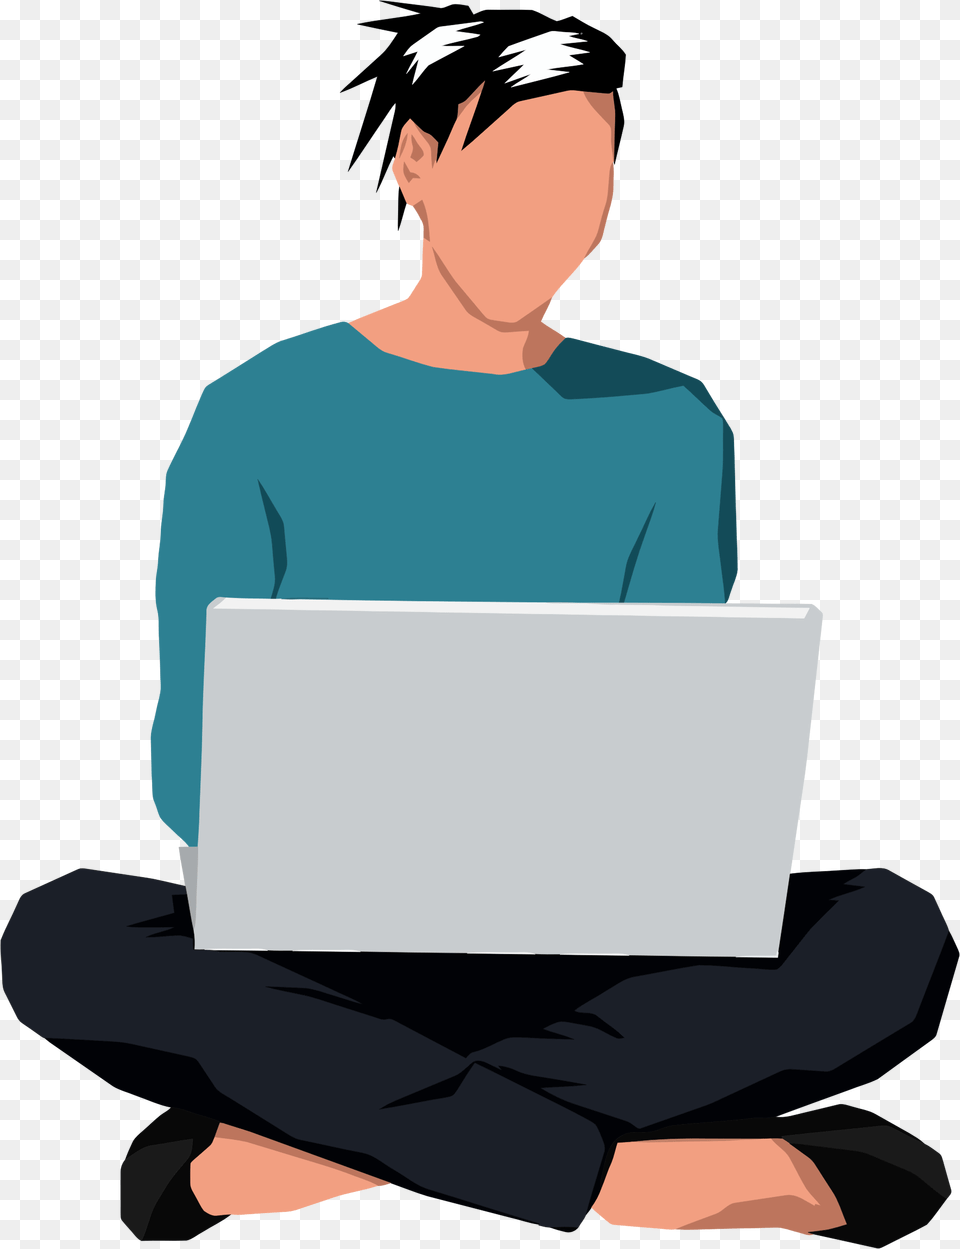 Woman Sitting Down With Cartoon Sitting Down At A Computer, Electronics, Reading, Laptop, Person Png Image